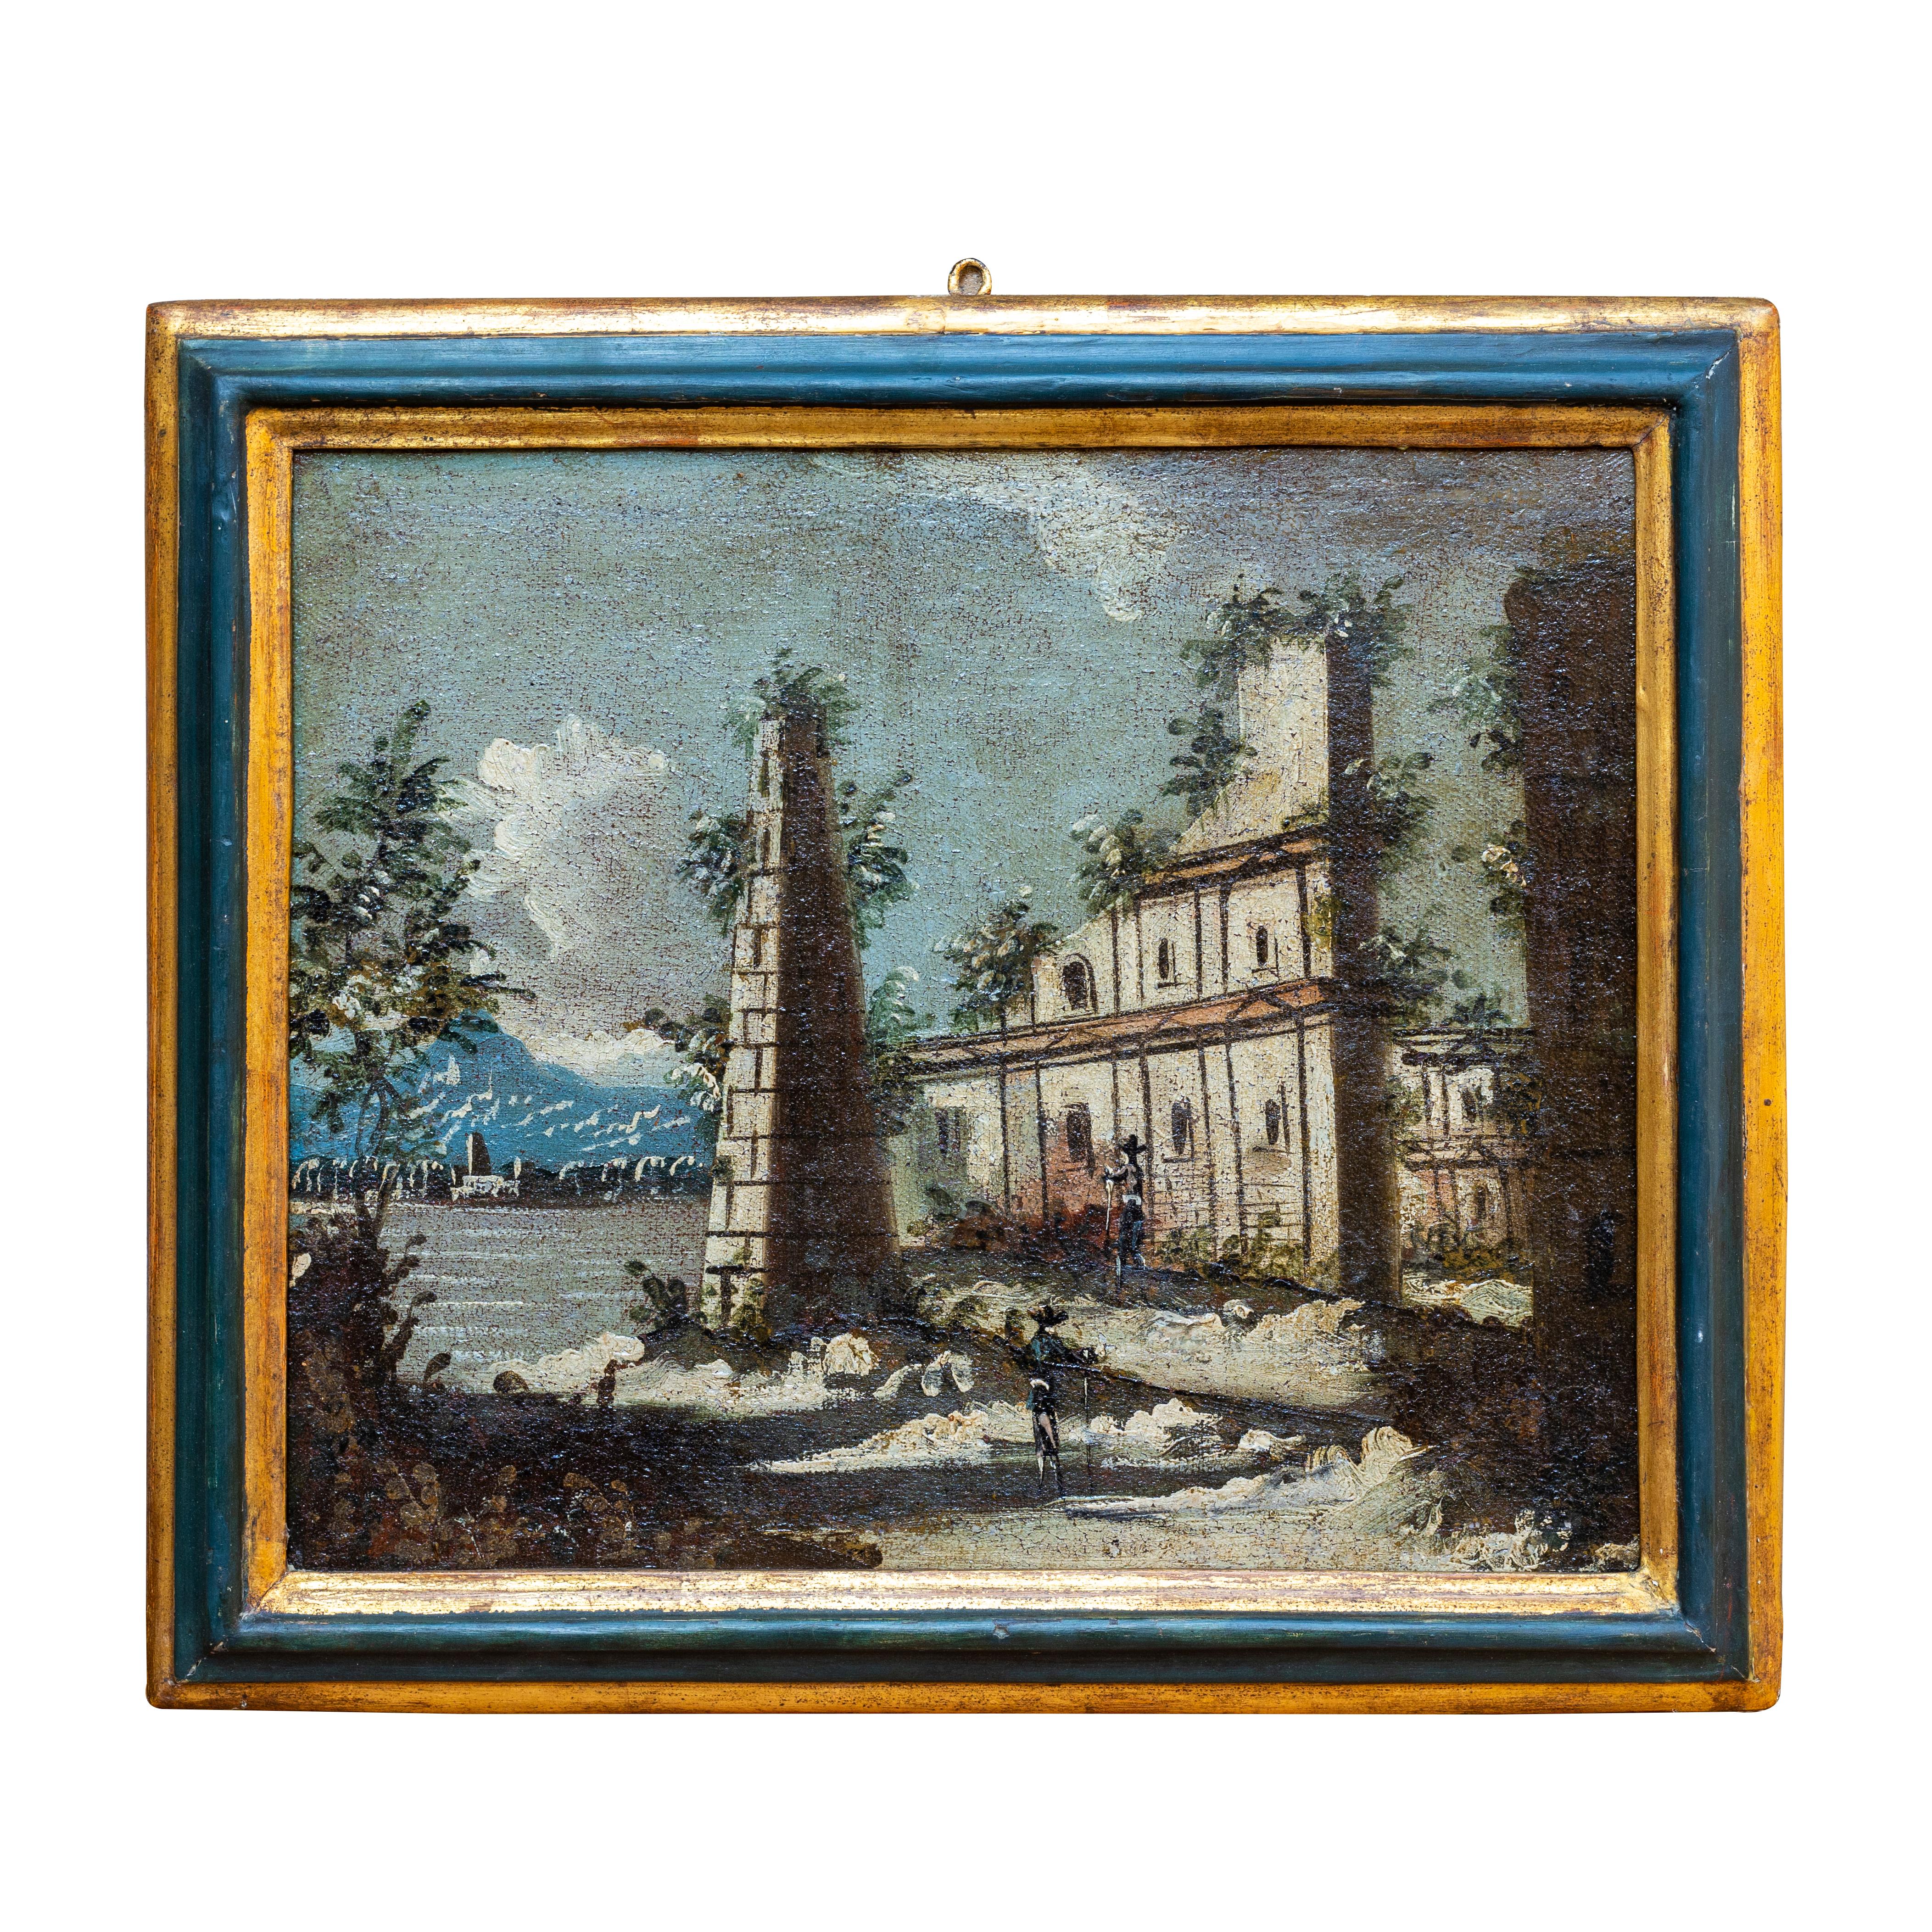 Three landscapes painted in oli on cavans attributed to Gaetano Vetturali Scool Lucca late 18th century Gaetano Vetturali 1701-1783 Was an Italian painter. In the period of the Gran tour painting small landscapes with architectures fontains and